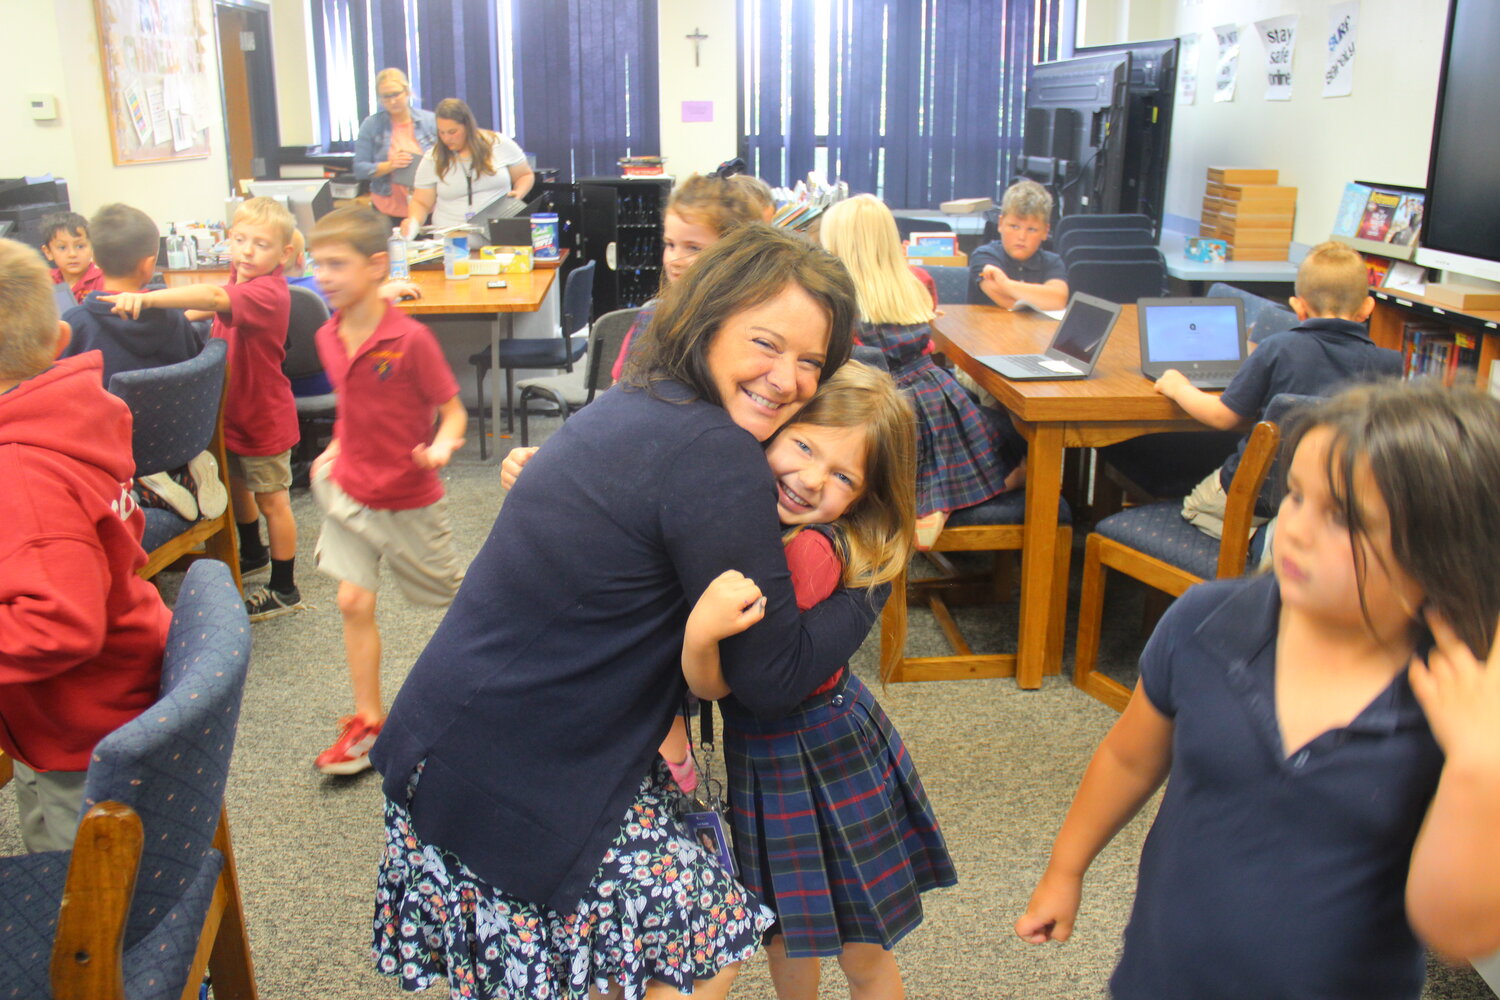 Holy Rosary Principal Lori Racine gets a hug from kindergartner Charlotte Boller in the school library on May 15. Charlotte and her classmates were preparing for technology class.